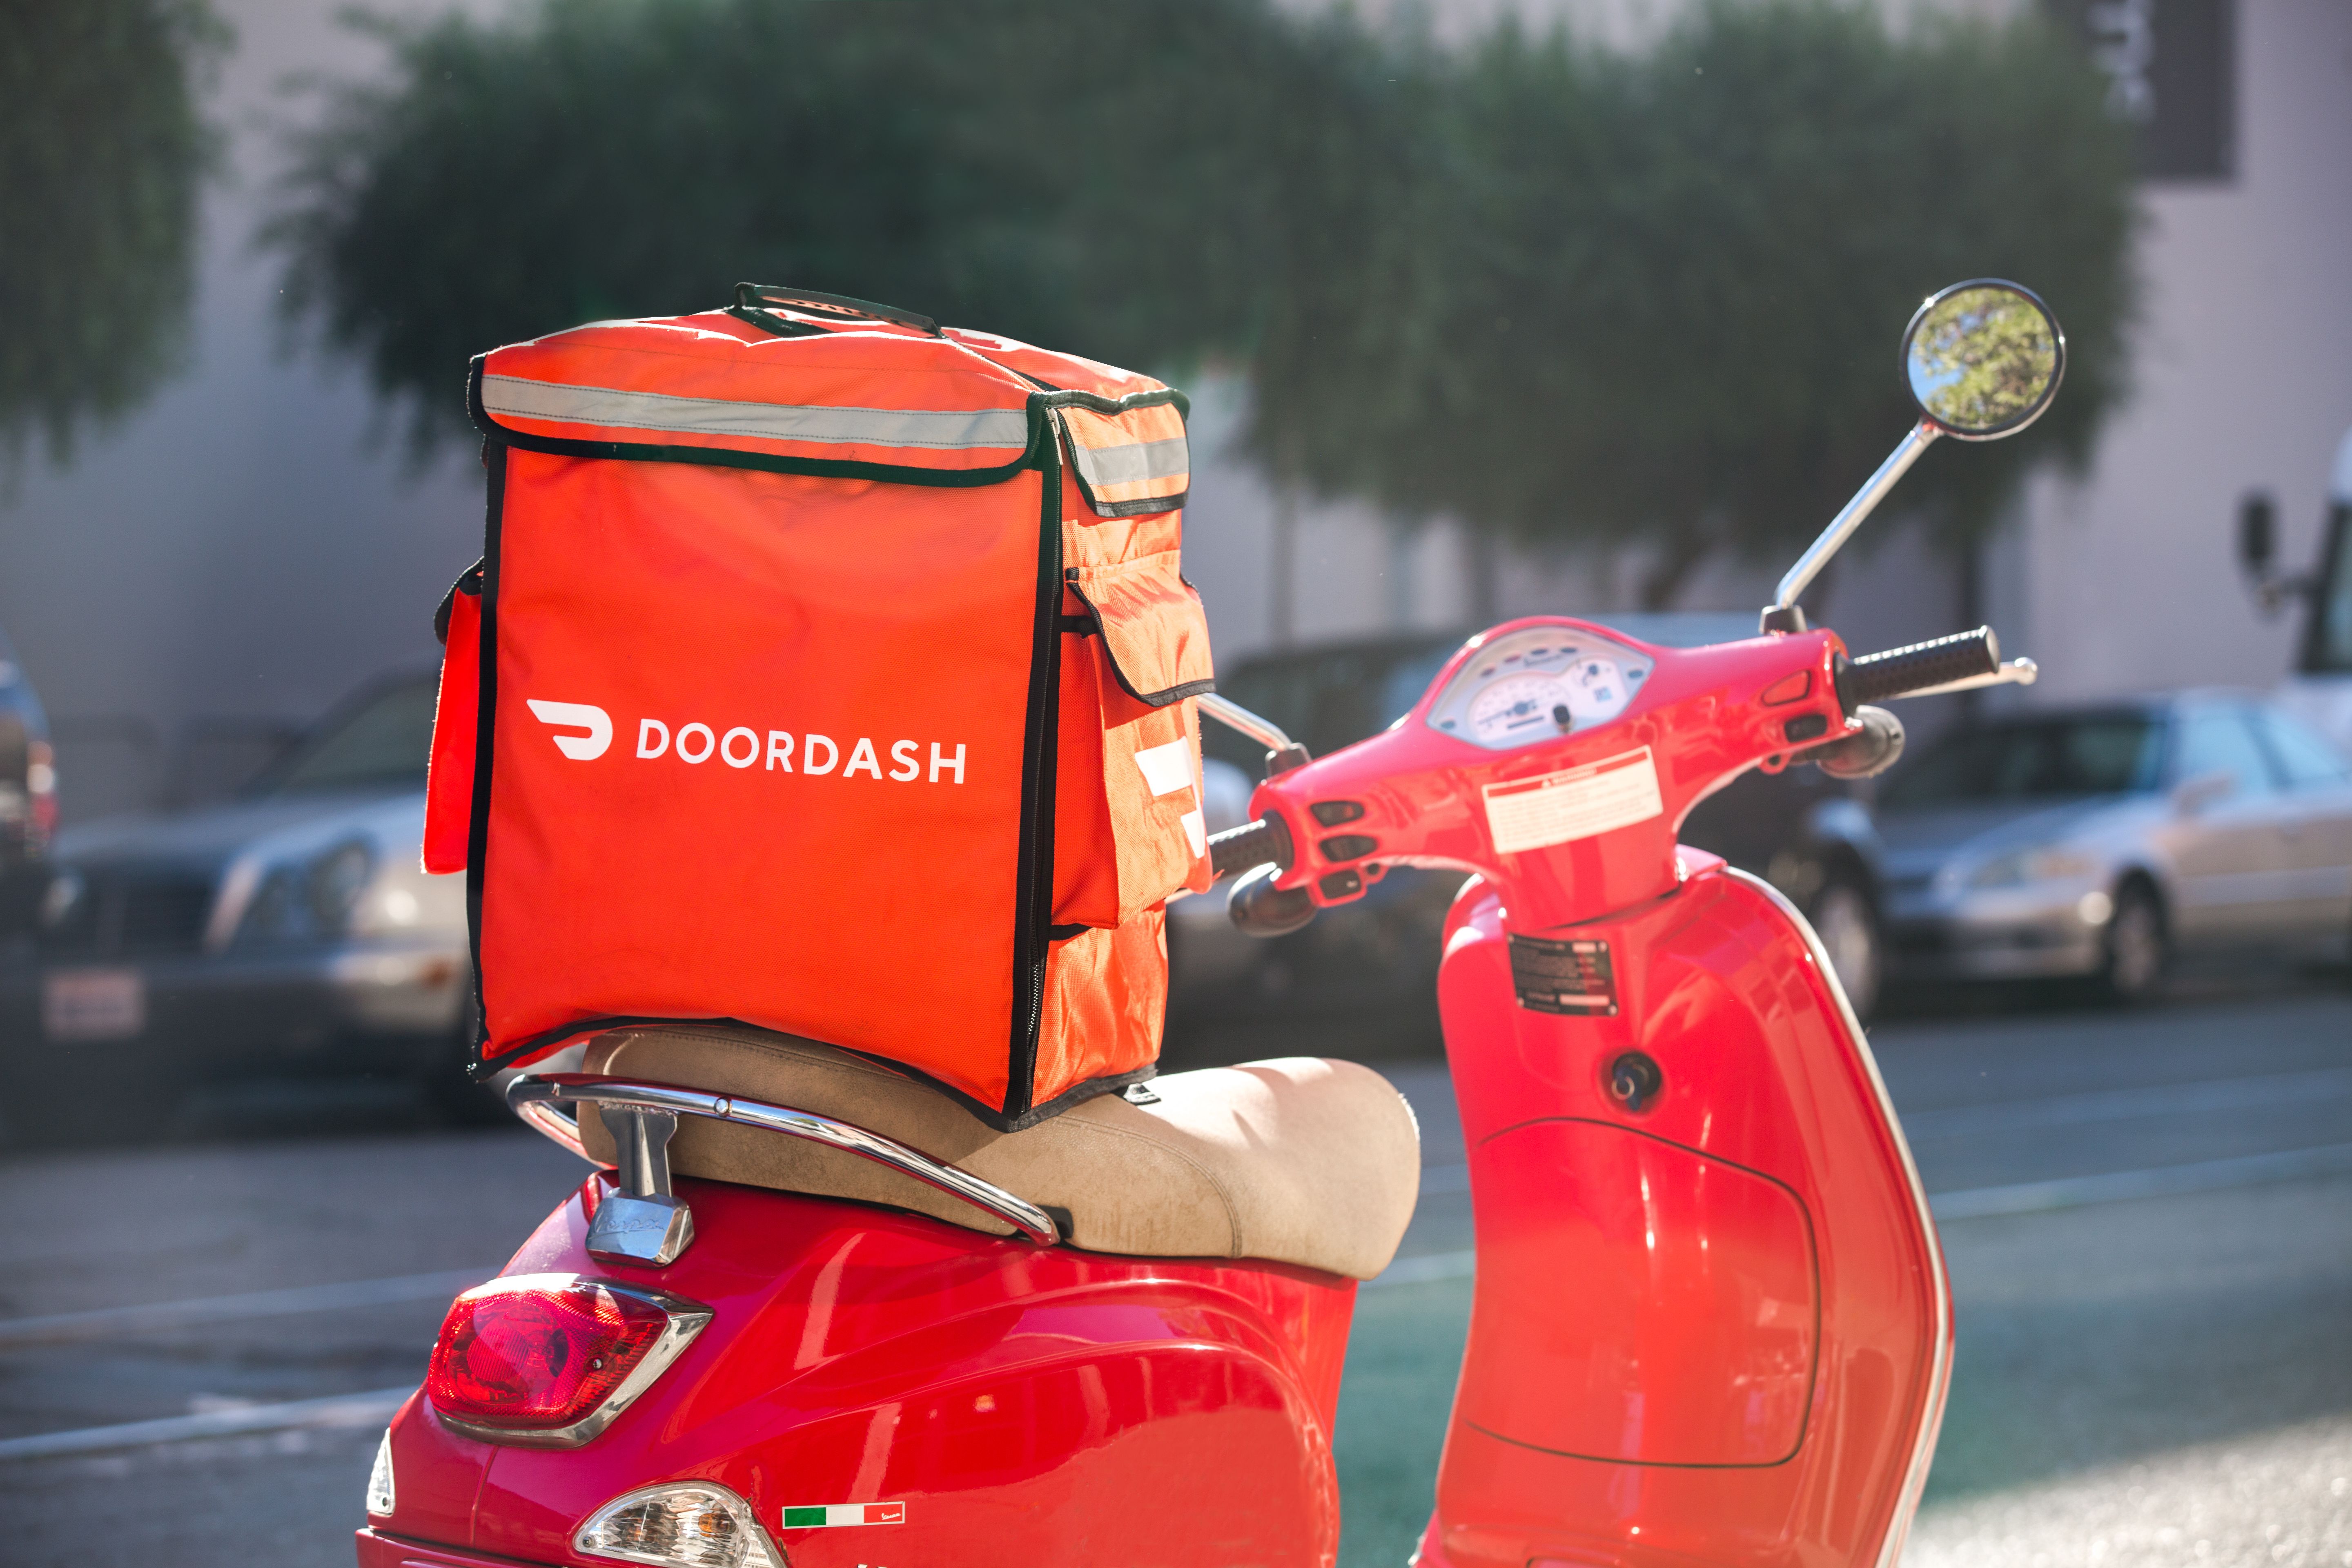 Sprouts Farmers Market Expands On-Demand Delivery Through Partnership with DoorDash